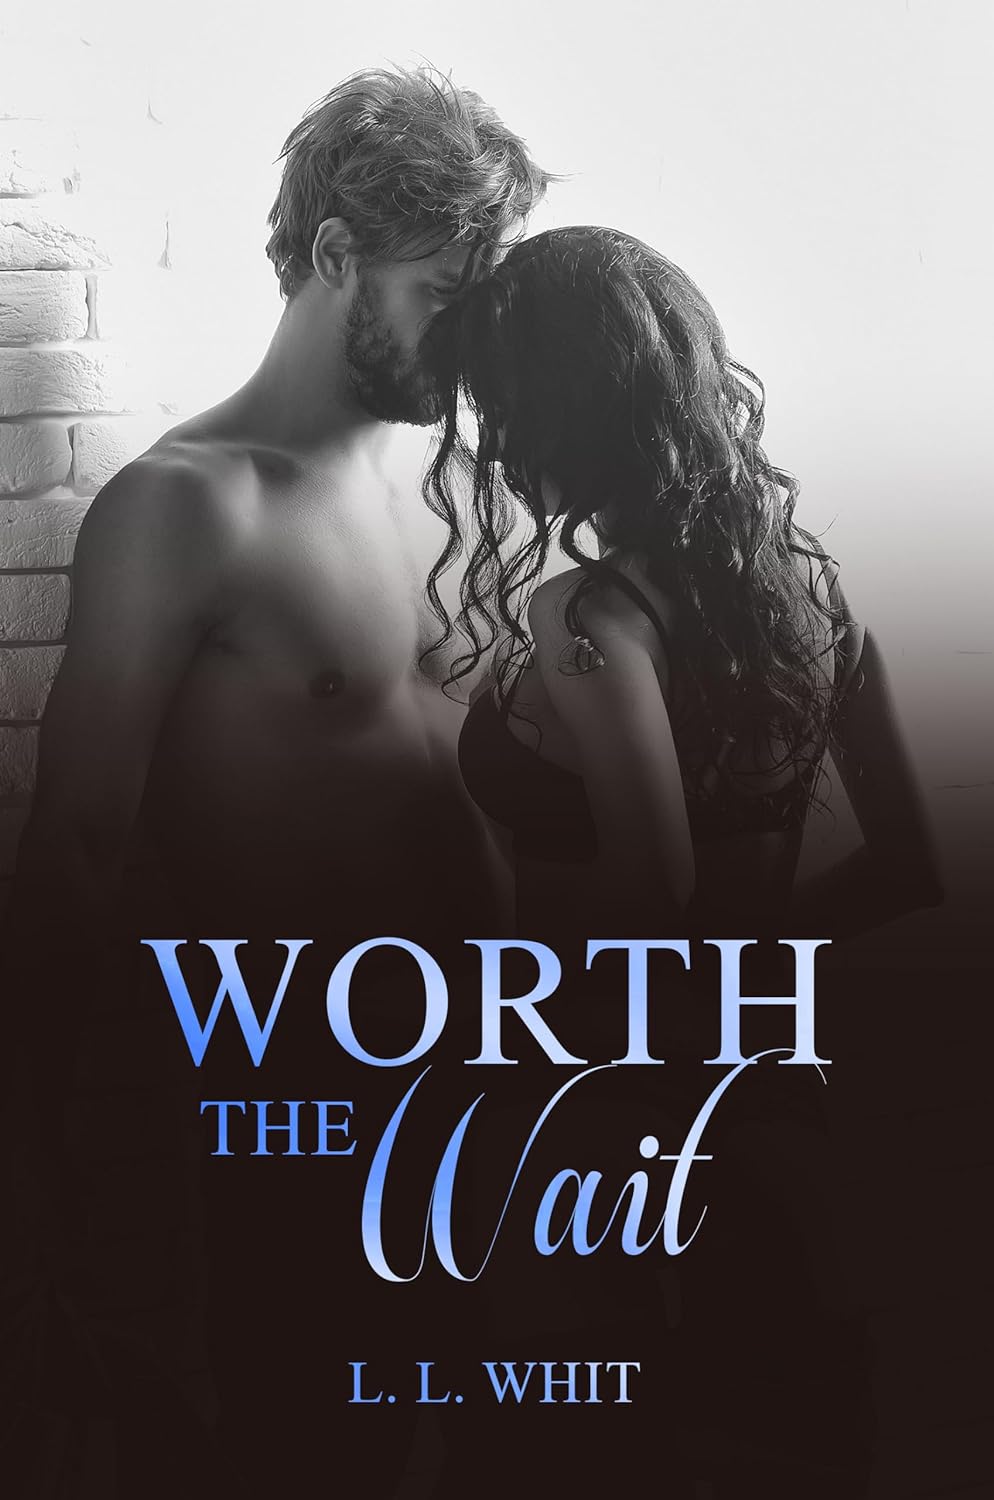 Captivating Second Chance Romance Unveiled in L.L. Whit's "Worth The Wait"